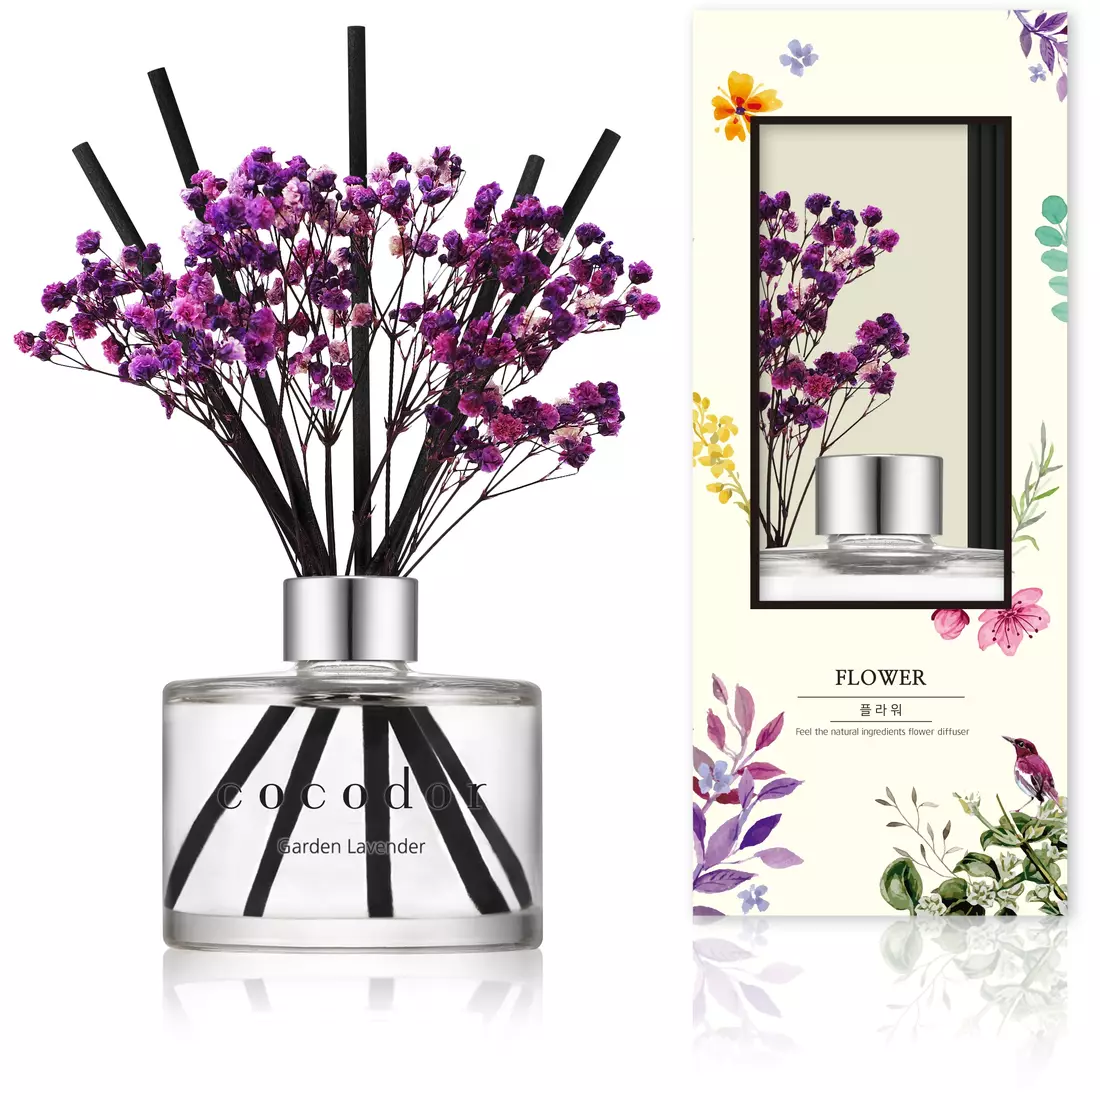 COCODOR aroma diffuser with sticks and flowers, garden lavender 120 ml